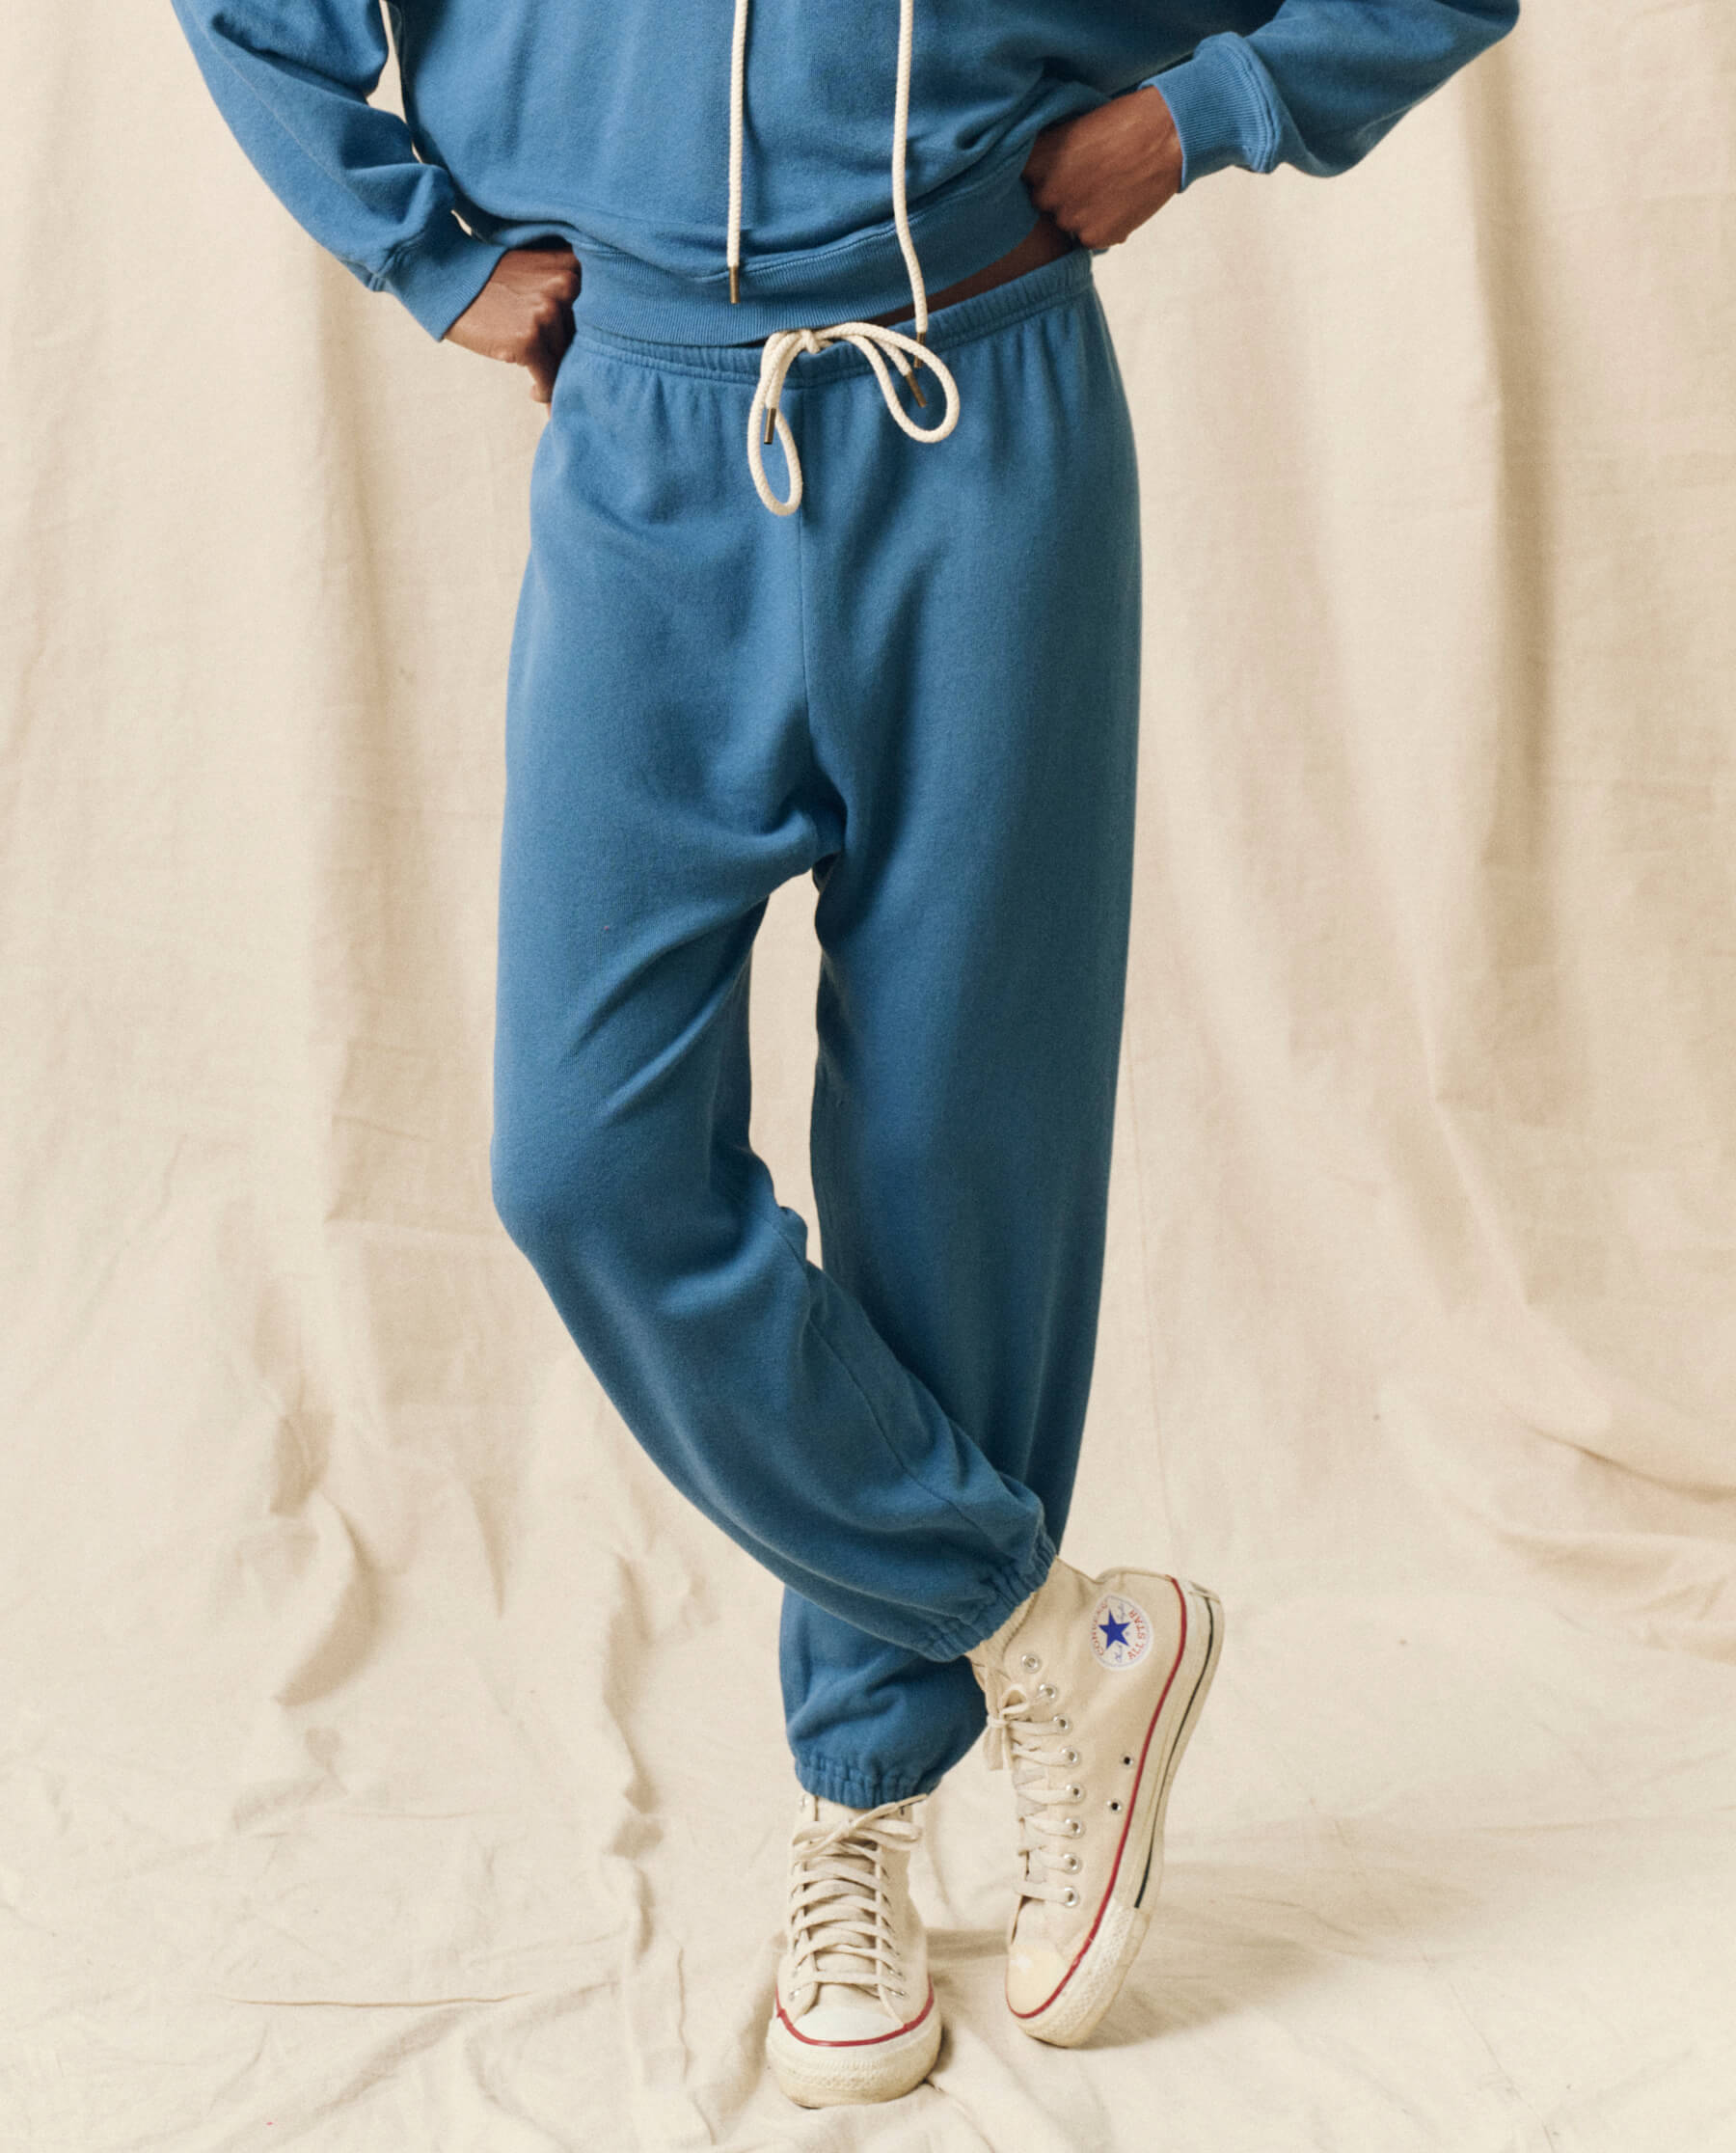 The Stadium Sweatpant. Solid -- Glacier Blue SWEATPANTS THE GREAT. HOL 23 KNITS